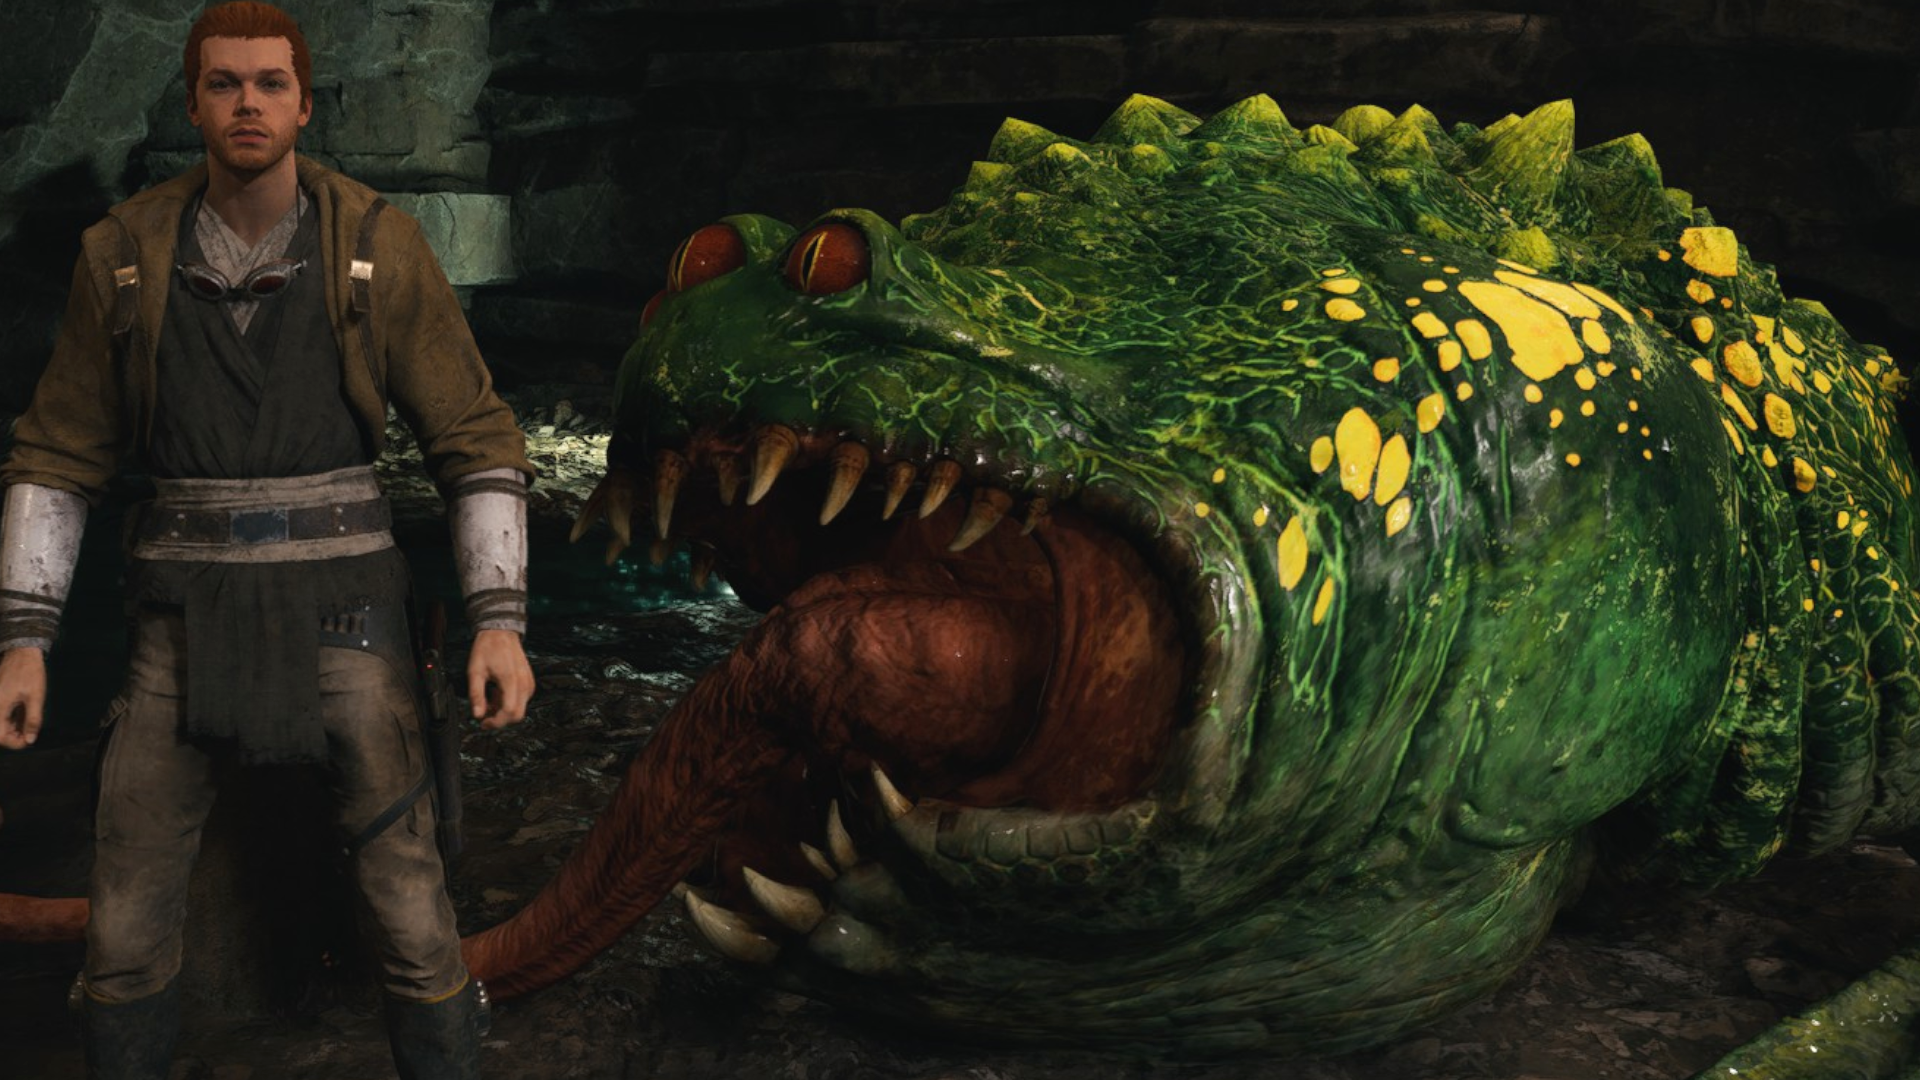 An image of Cal Kestis being attacked by Oggdo Boggdo, Star War's worst frog.